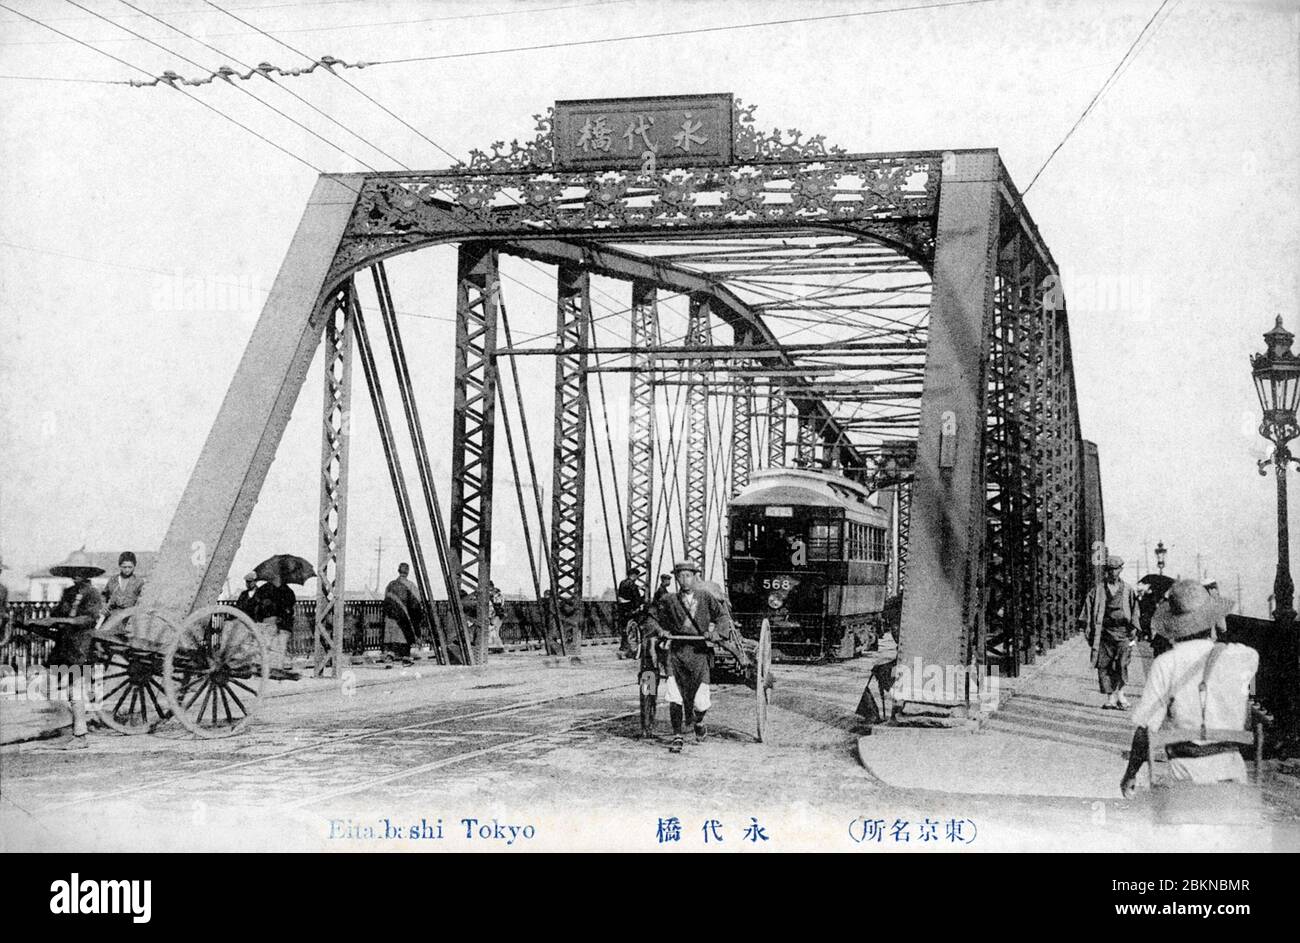 [ 1910s Japan - Steel Bridge across the Sumidagawa River in Tokyo ] —   Eitaibashi Bridge in Tokyo. The first Eitaibashi Bridge was built in 1698. The bridge on this photo was completed in 1897 (Meiji 30). The streetcar line seen on this photo was added to the bridge in 1904 (Meiji 37). Eitaibashi Bridge was badly damaged by the Great Kanto Earthquake (Kanto Daishinsai) of September 1, 1923 (Taisho 12) and replaced by the current bridge three years later.  20th century vintage postcard. Stock Photo